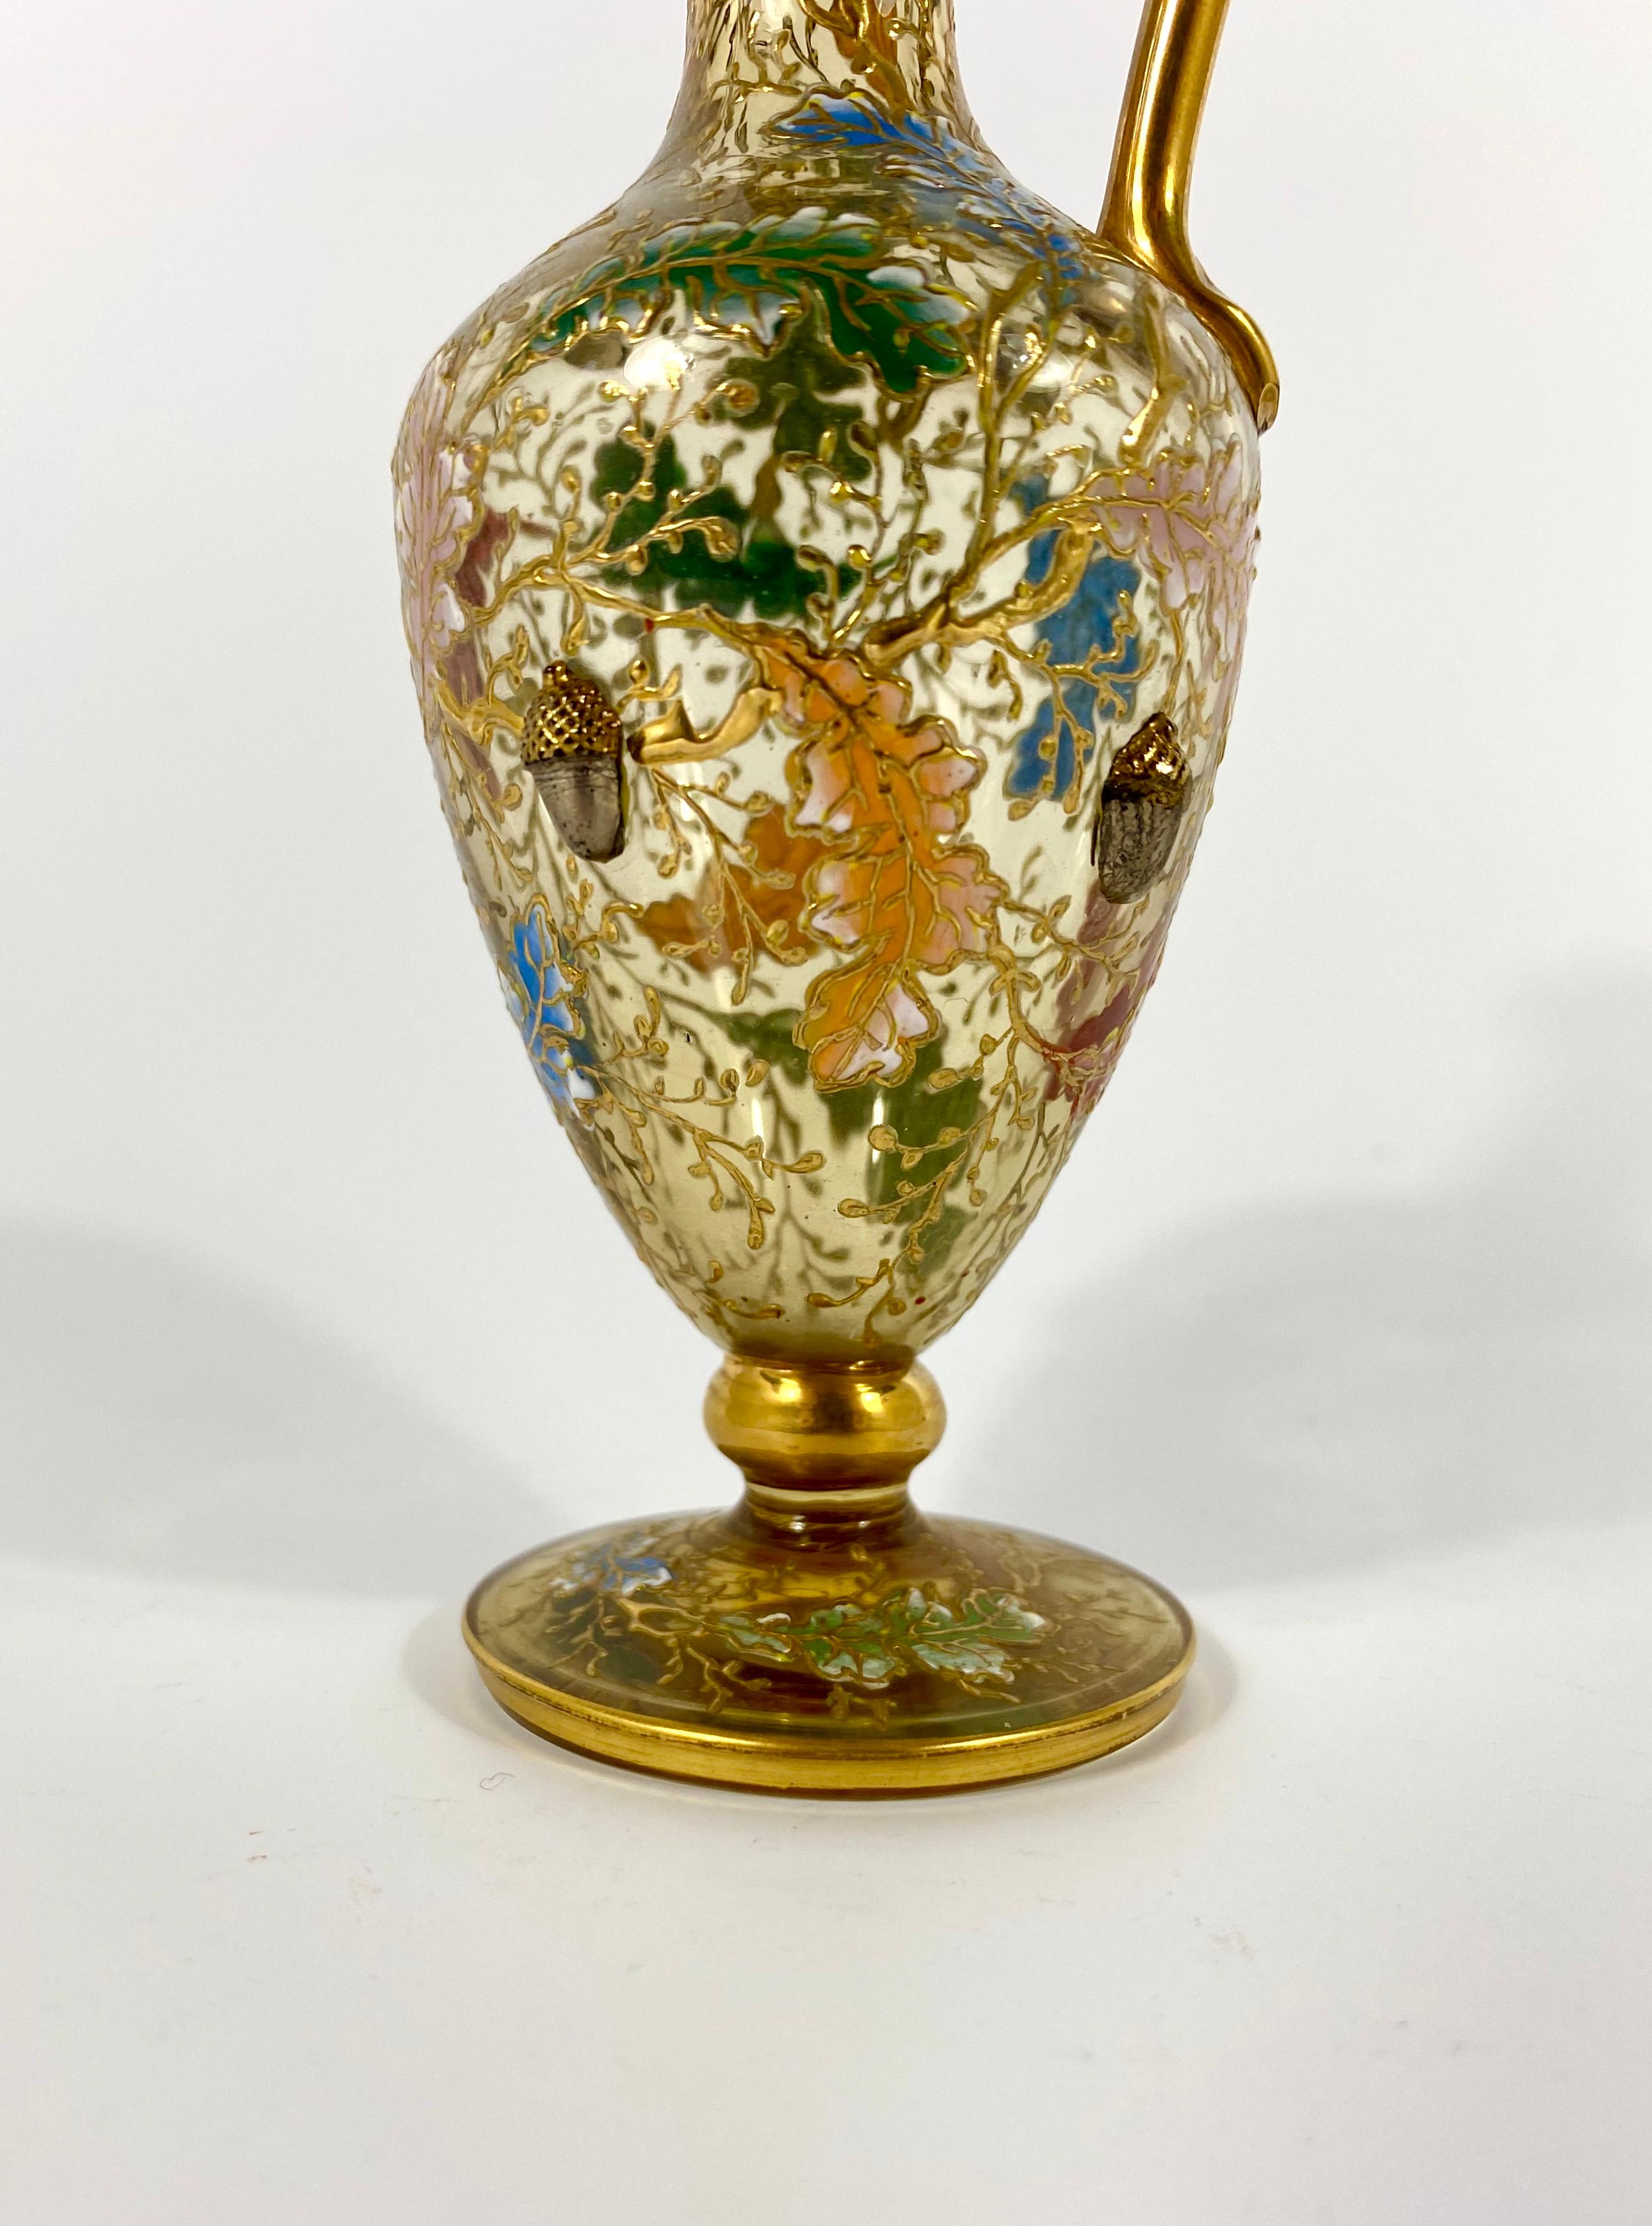 A Moser, miniature enameled glass ewer, circa 1890. The elegant classical shaped ewer, moulded with acorns, hanging amongst enameled leafs, from gilt branches, with a large insect flying above. Having a simple gilt strap handle, and set upon a